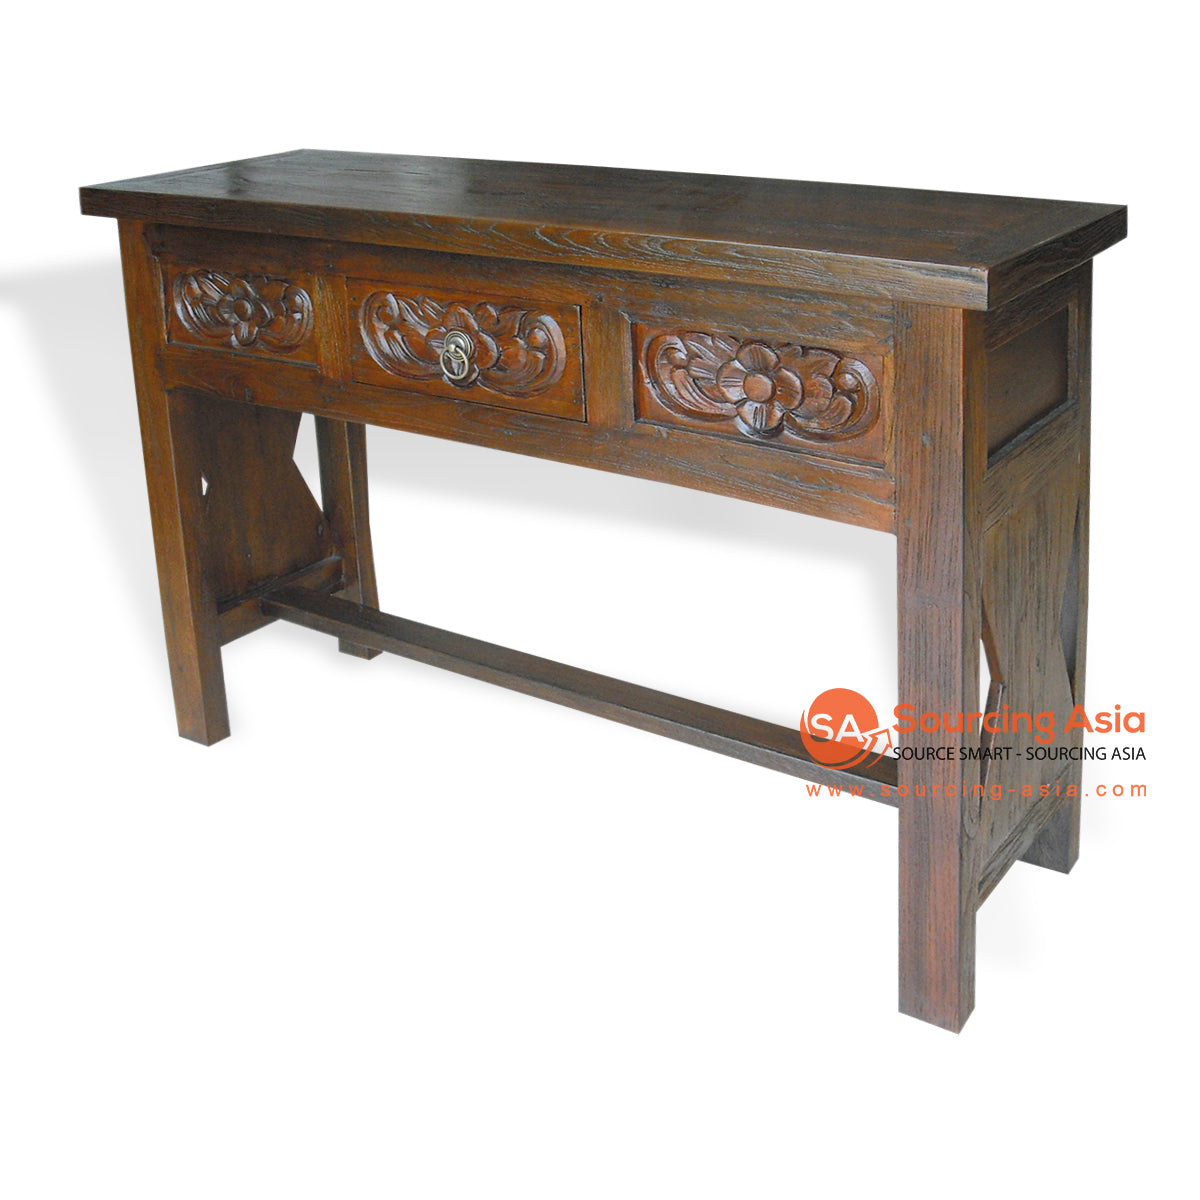 KYT10032 DARK BROWN RECYCLED TEAK WOOD ONE DRAWER RUSTIC CARVED CONSOLE TABLE